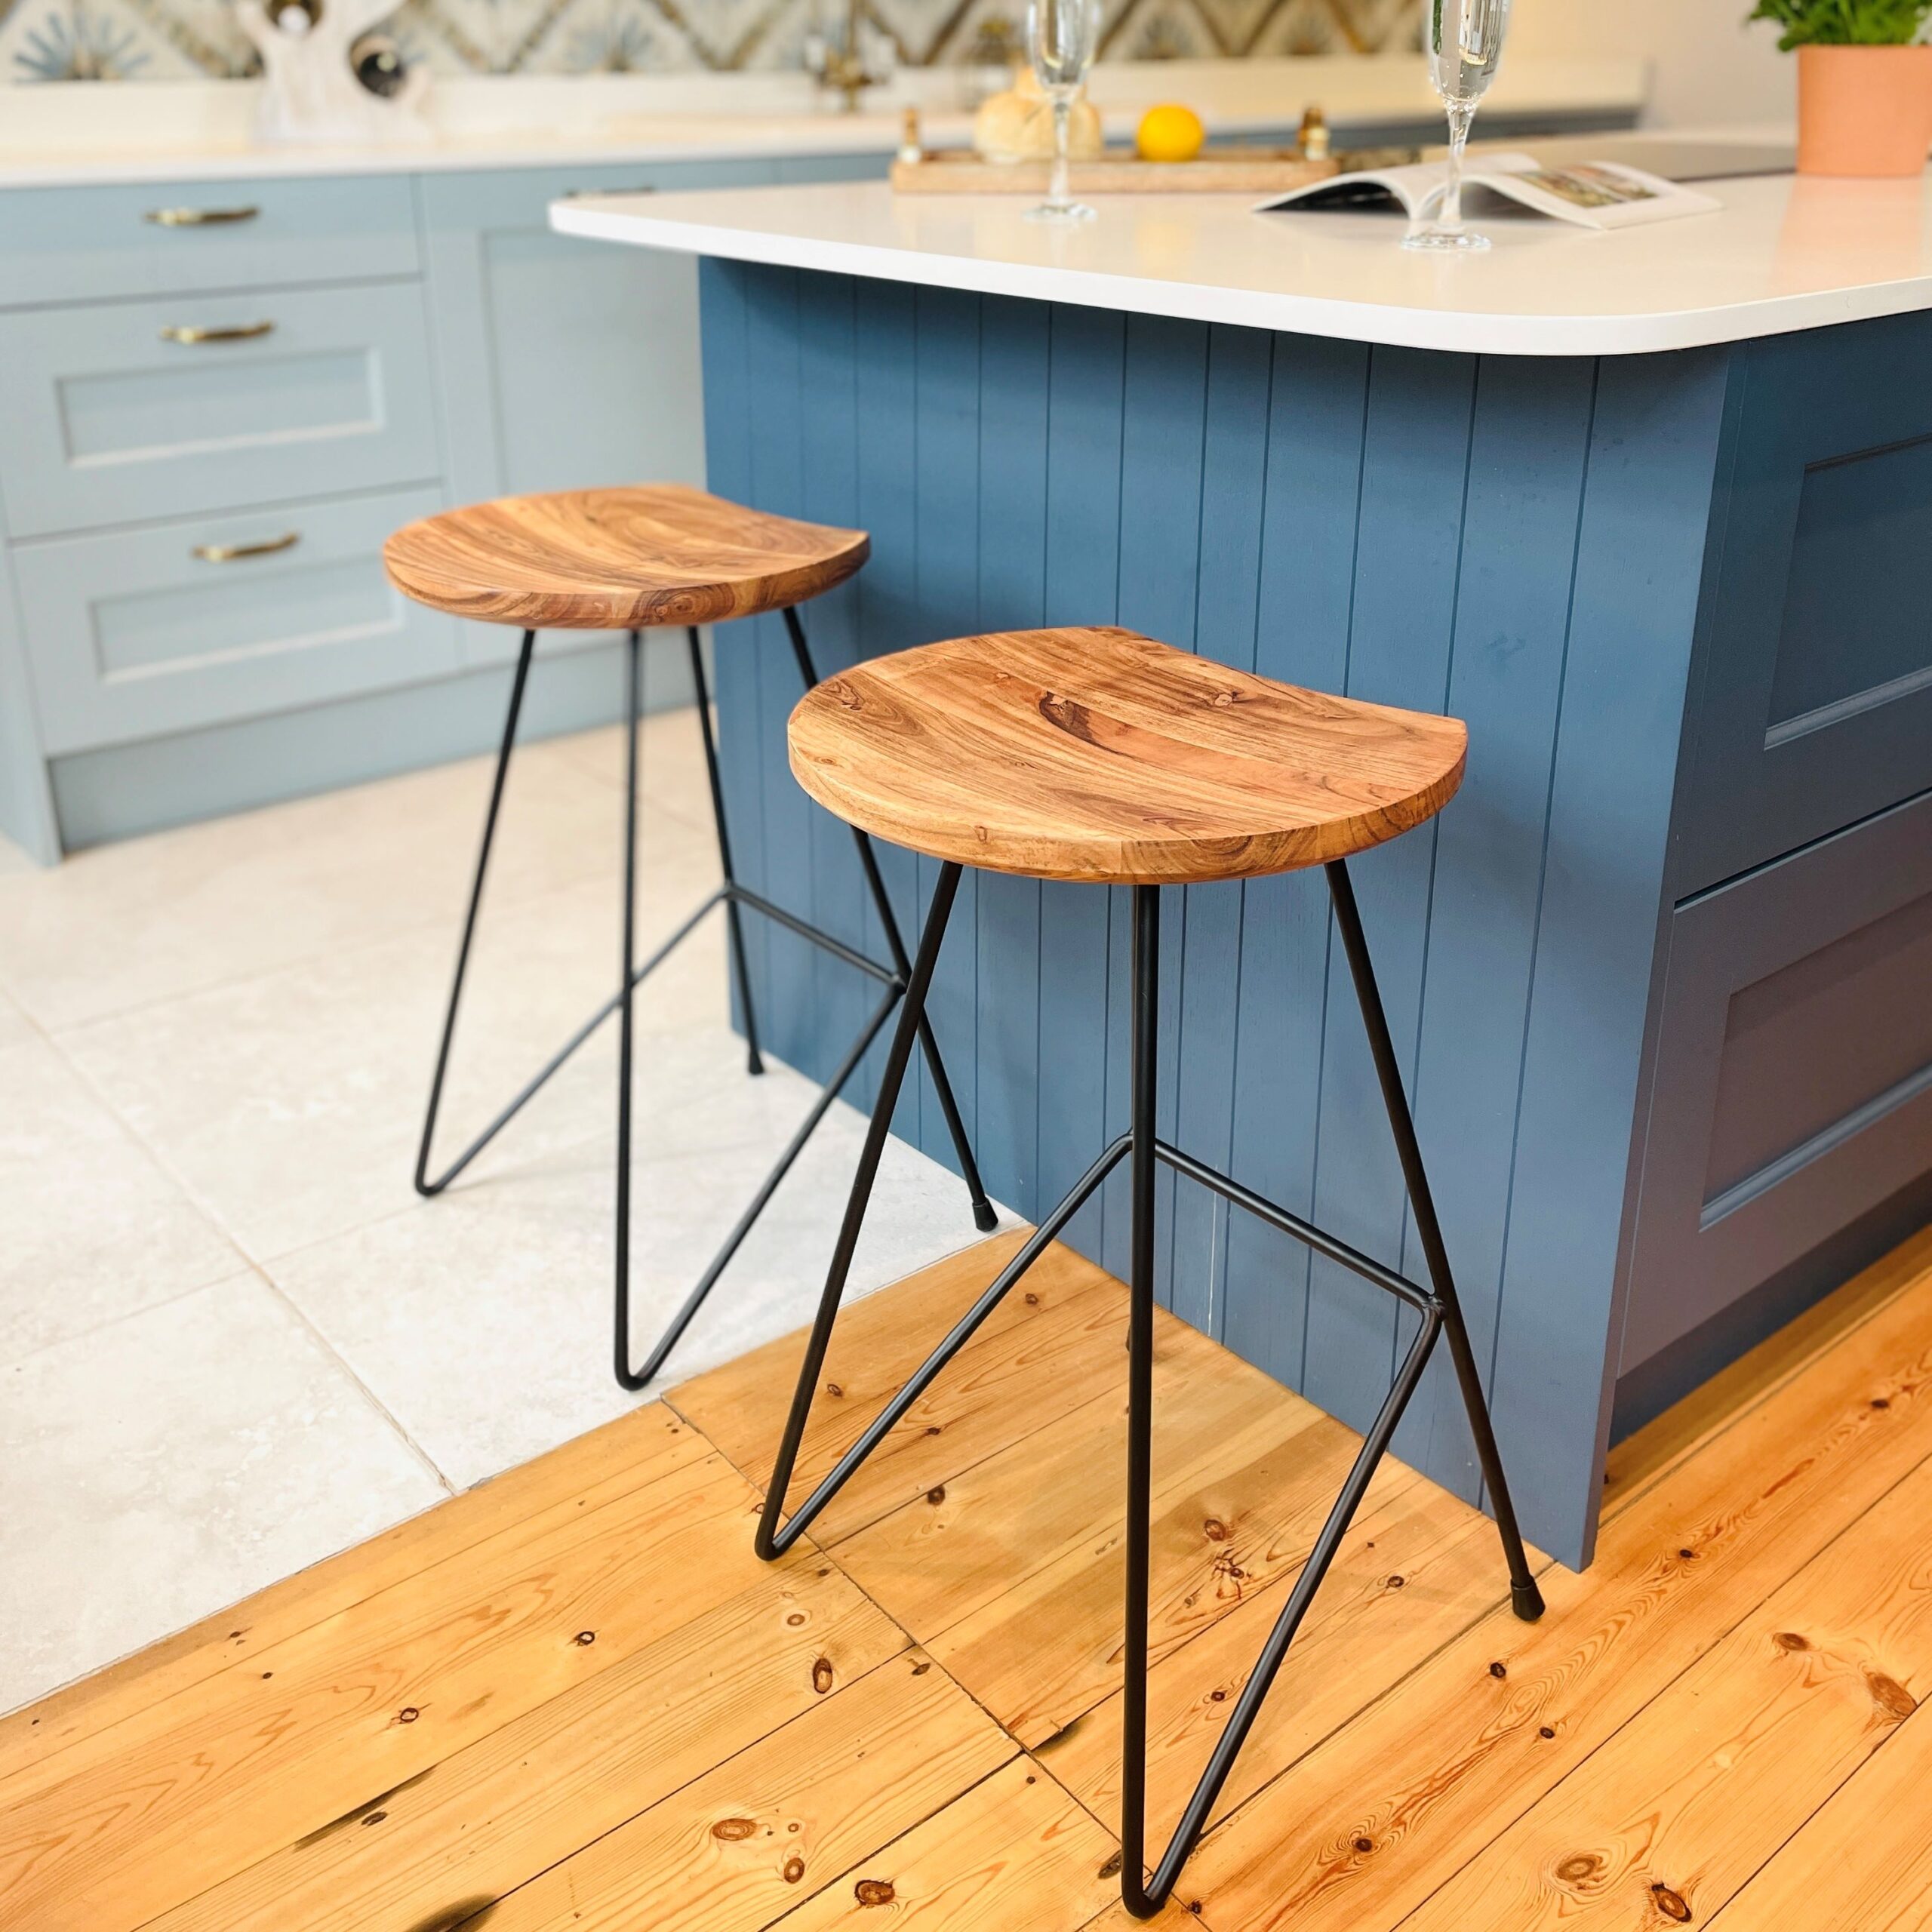 Two industrial bar stools on wooden floor in front of blue kitchen island